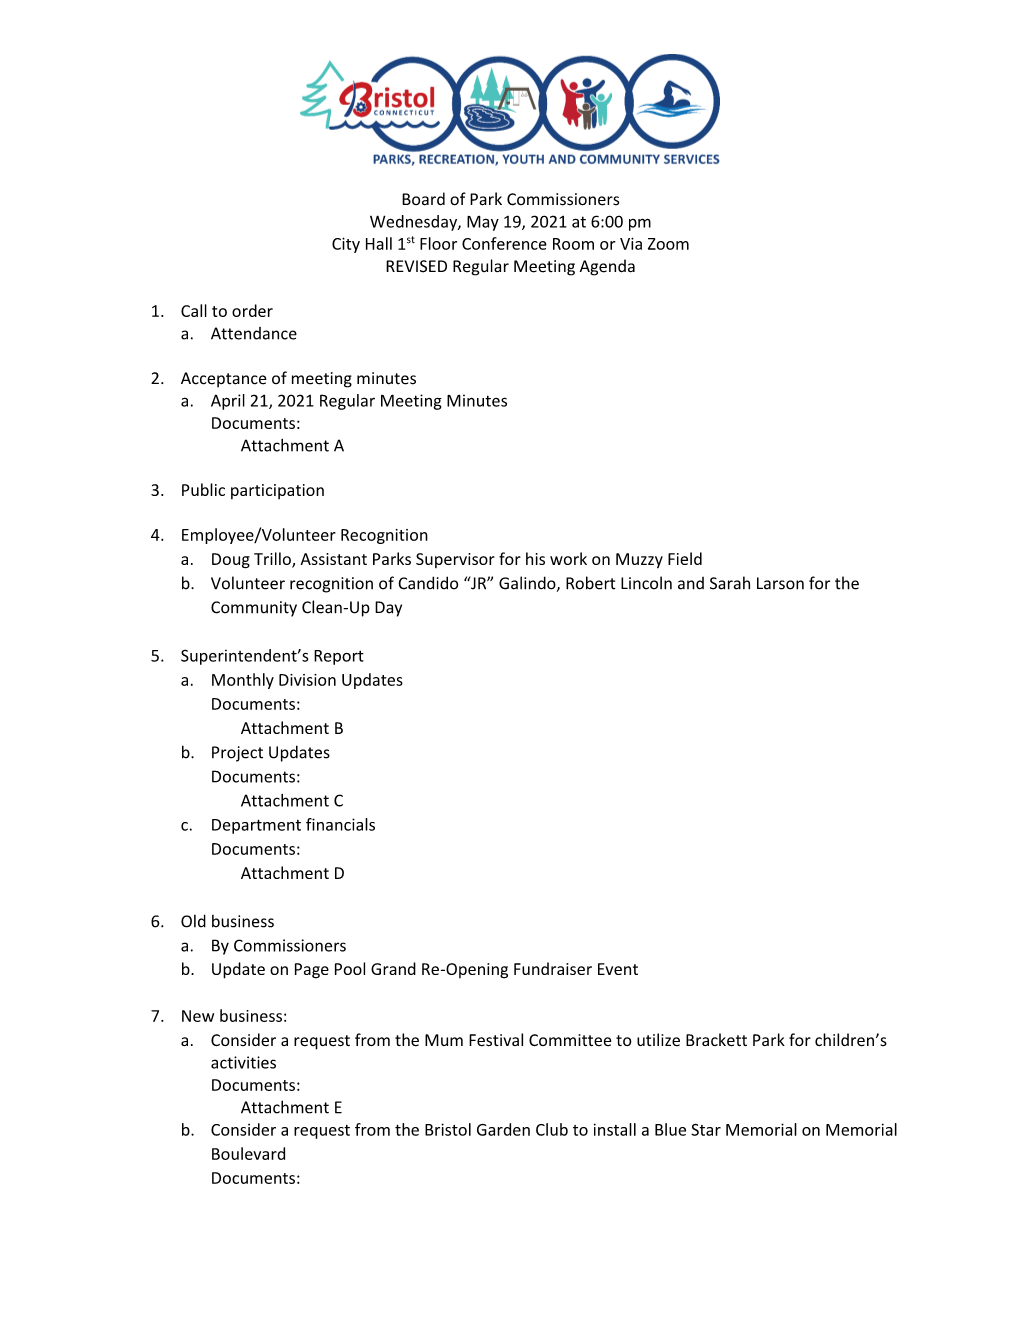 Board of Park Commissioners Wednesday, May 19, 2021 at 6:00 Pm City Hall 1St Floor Conference Room Or Via Zoom REVISED Regular Meeting Agenda